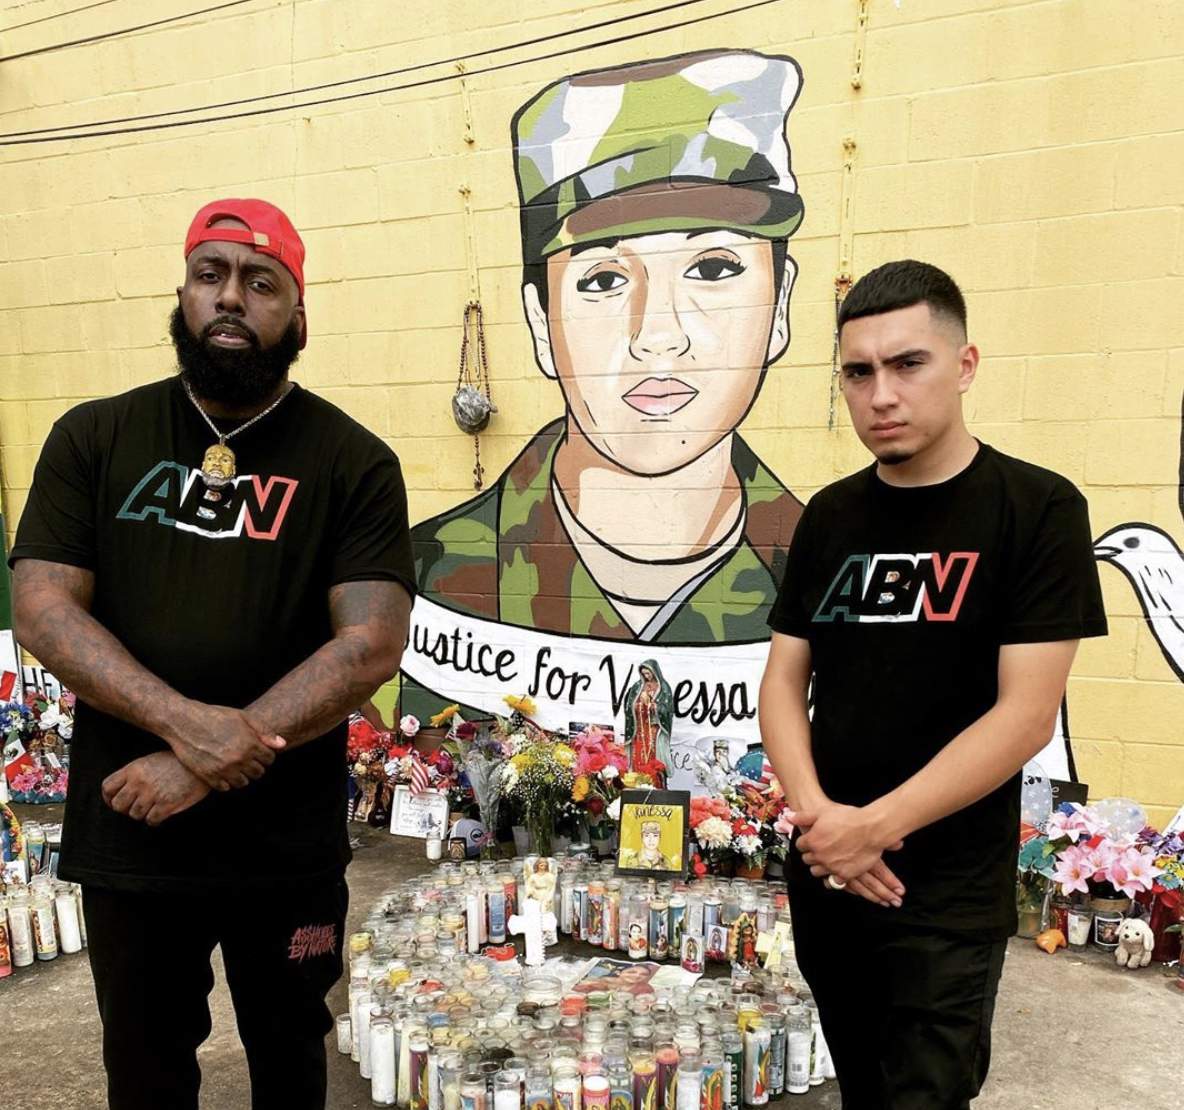 Houston rapper Trae Tha Truth is selling shirts, masks to raise funds for Vanessa Guillens family